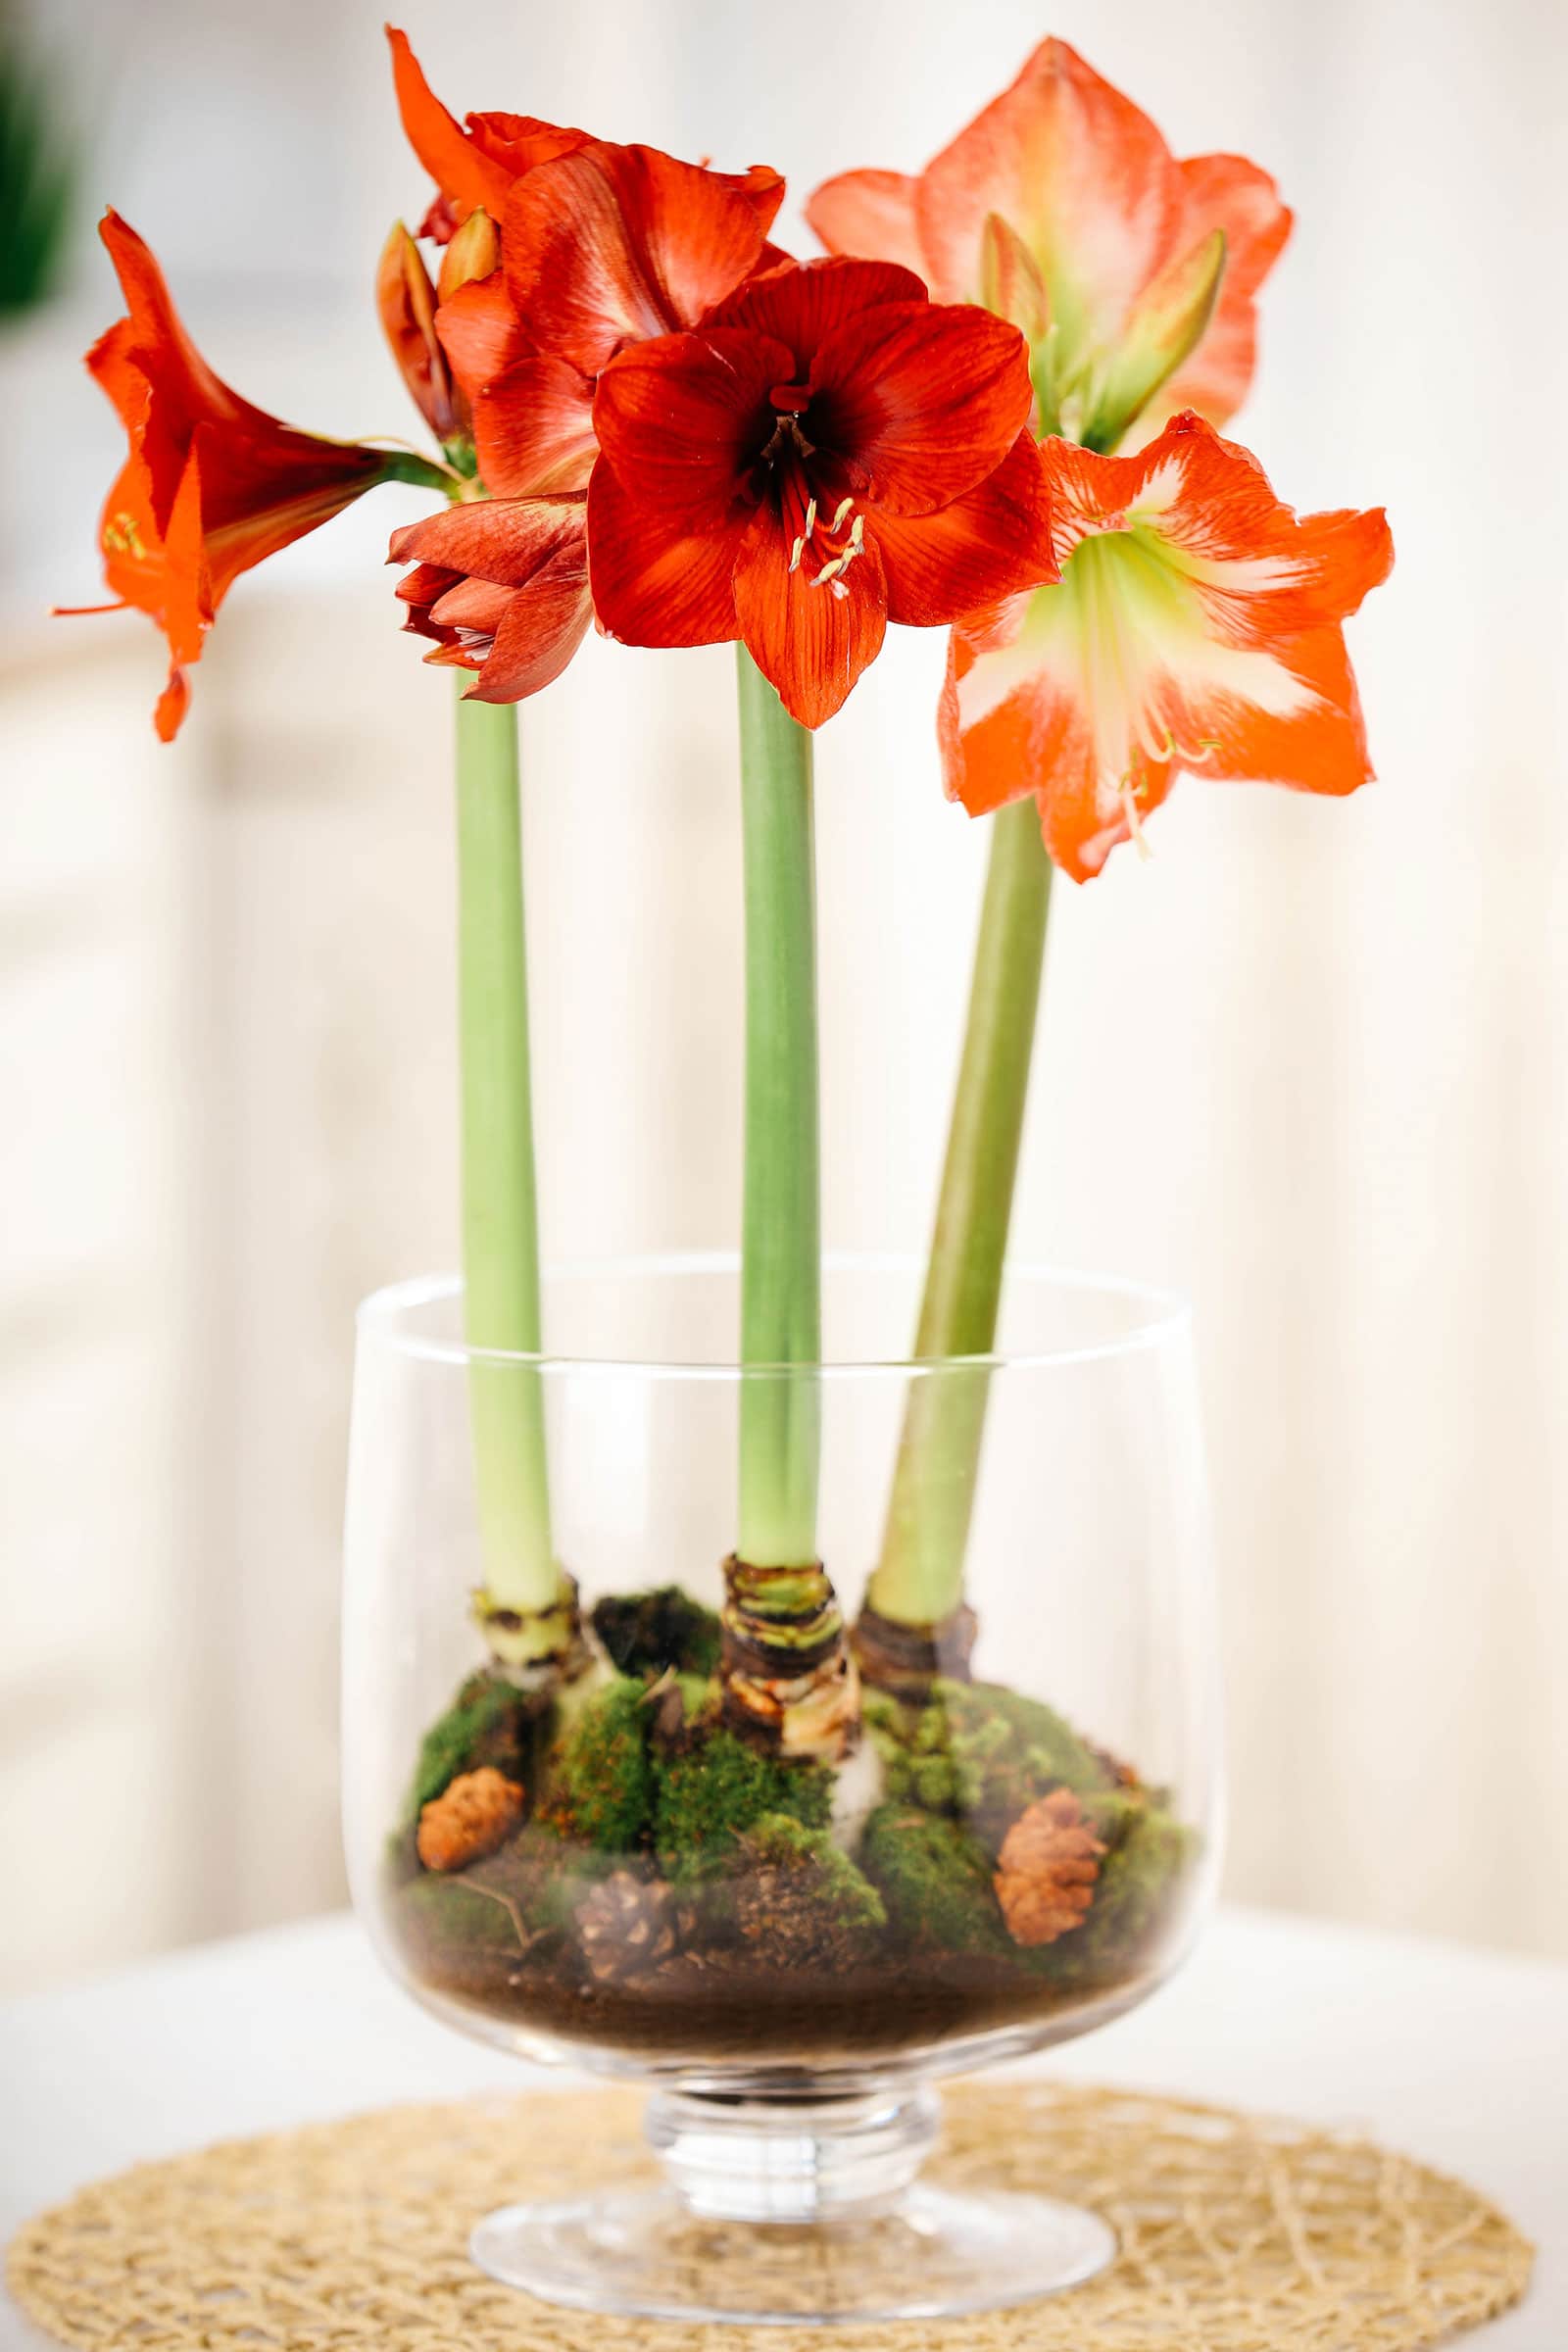 Three red amaryllis plants displayed in a glass vase in peat and moss potting medium